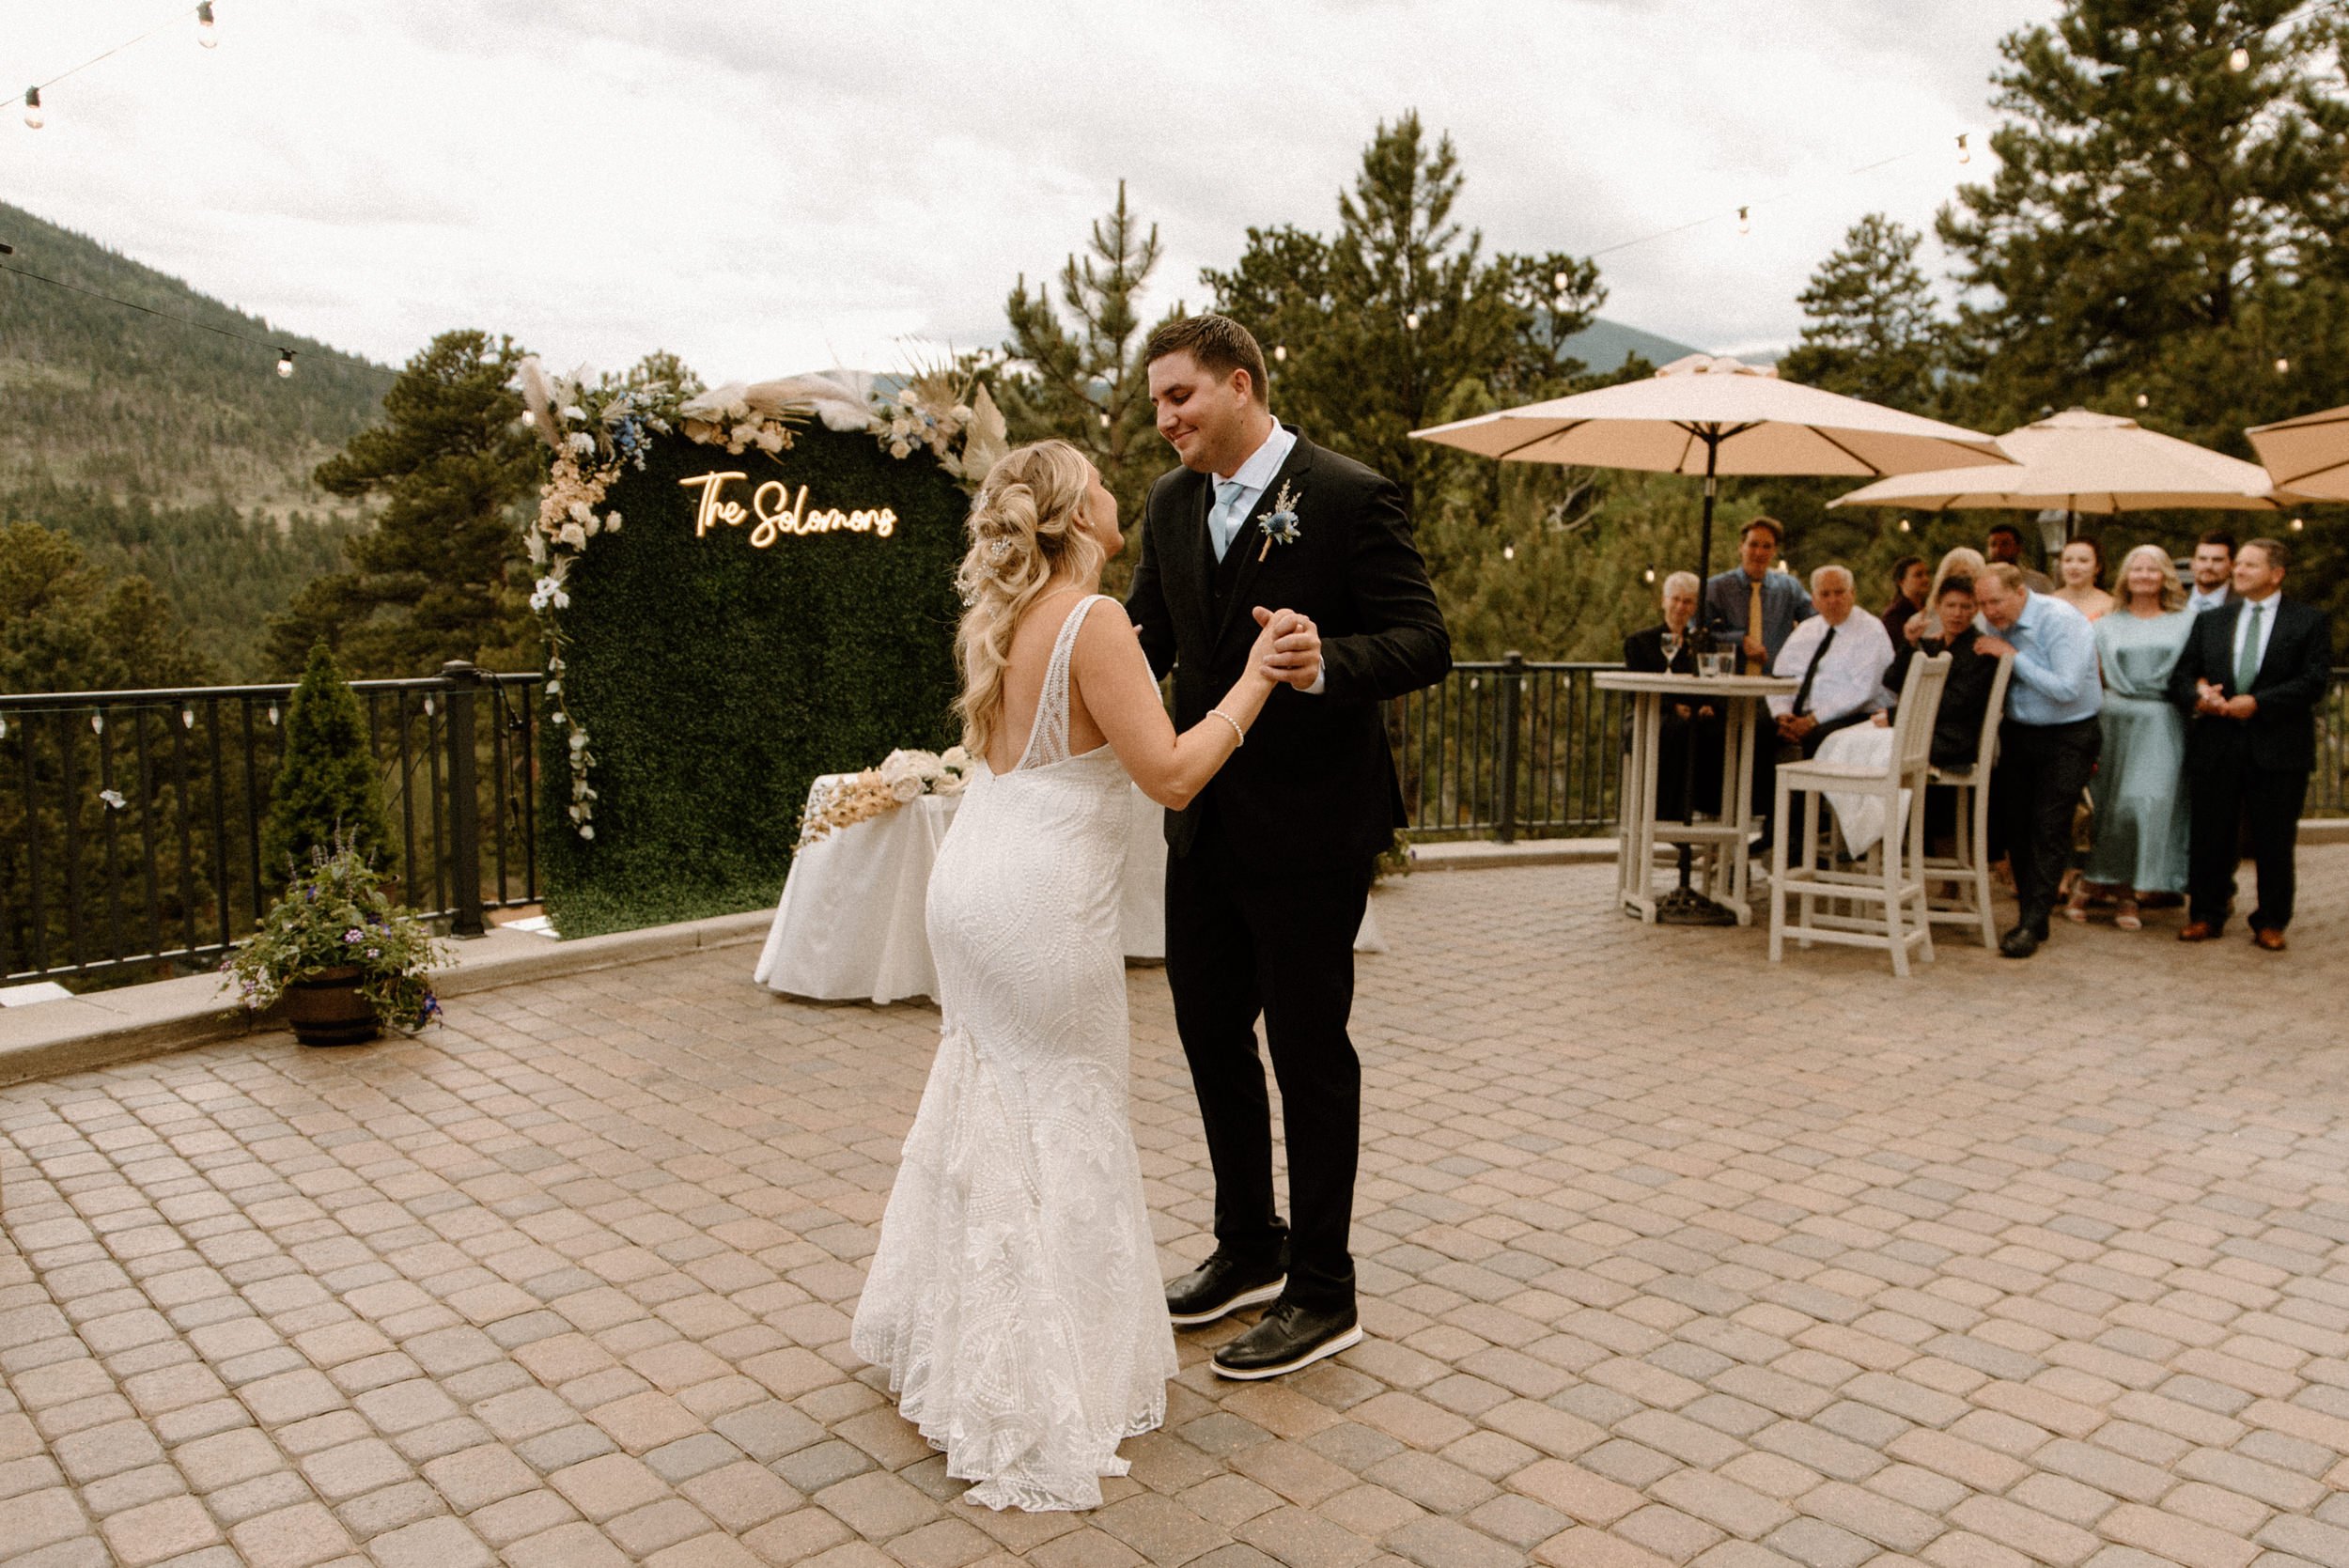 The bride and groom share their first dance outside of the Della Terra Mountain Chateau in Estes Park, CO